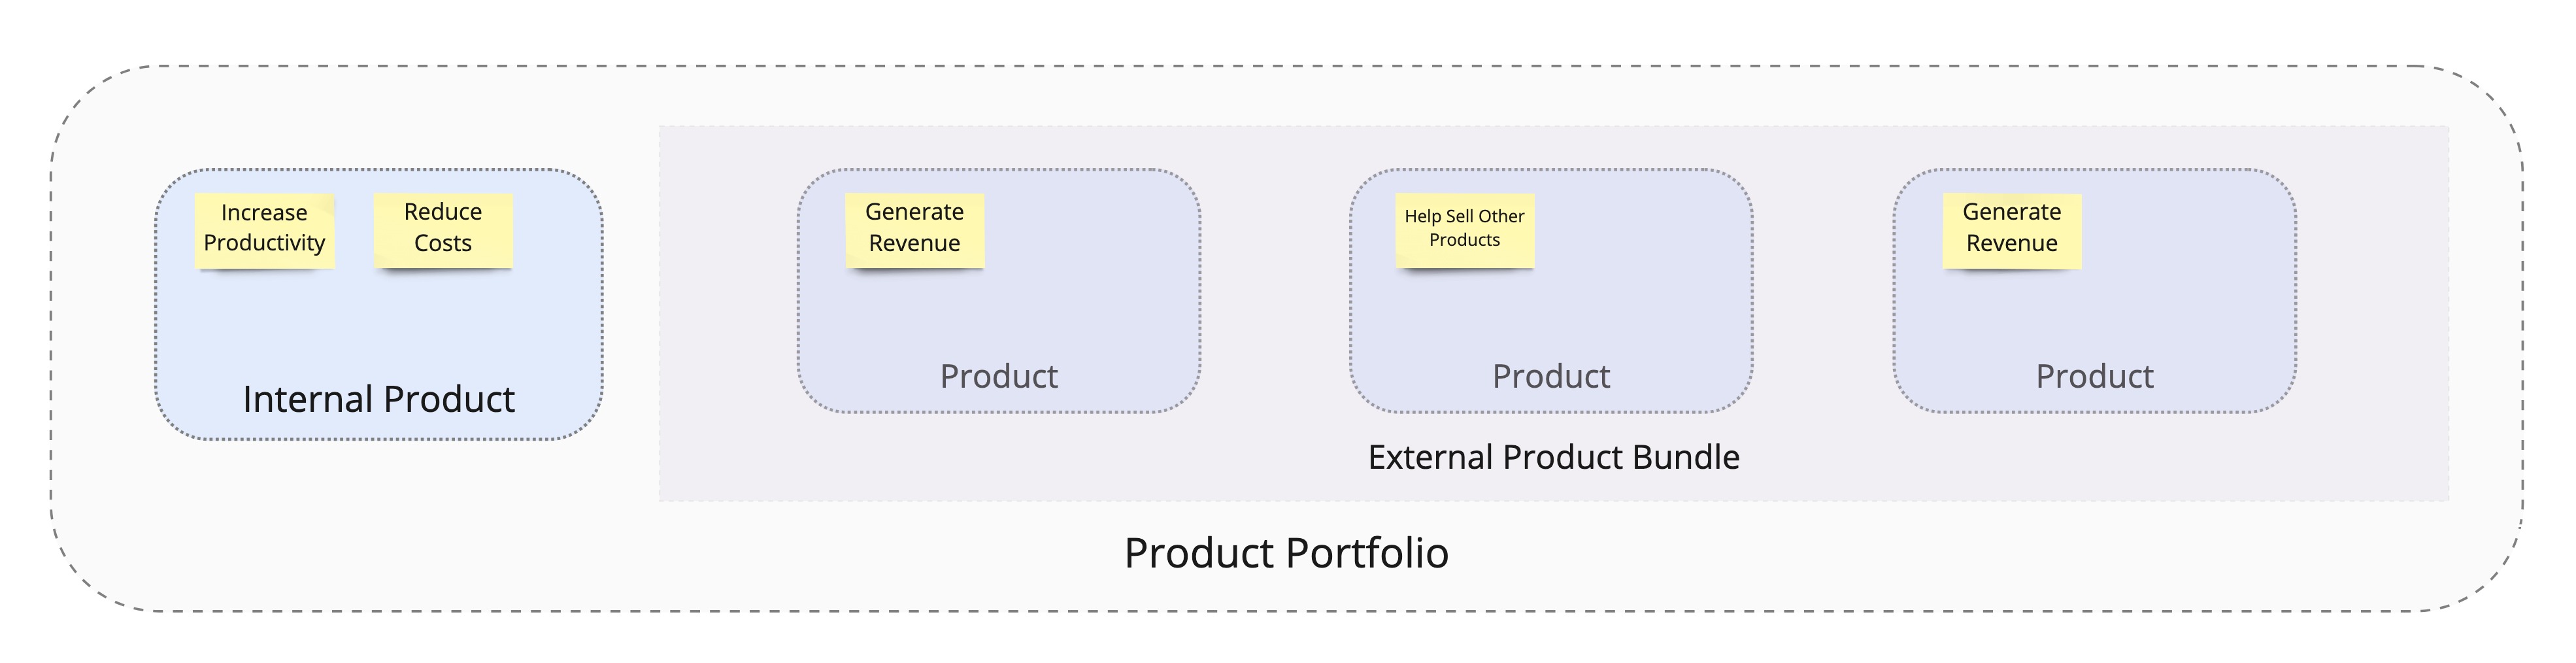 Internal & External Product Value Propositions